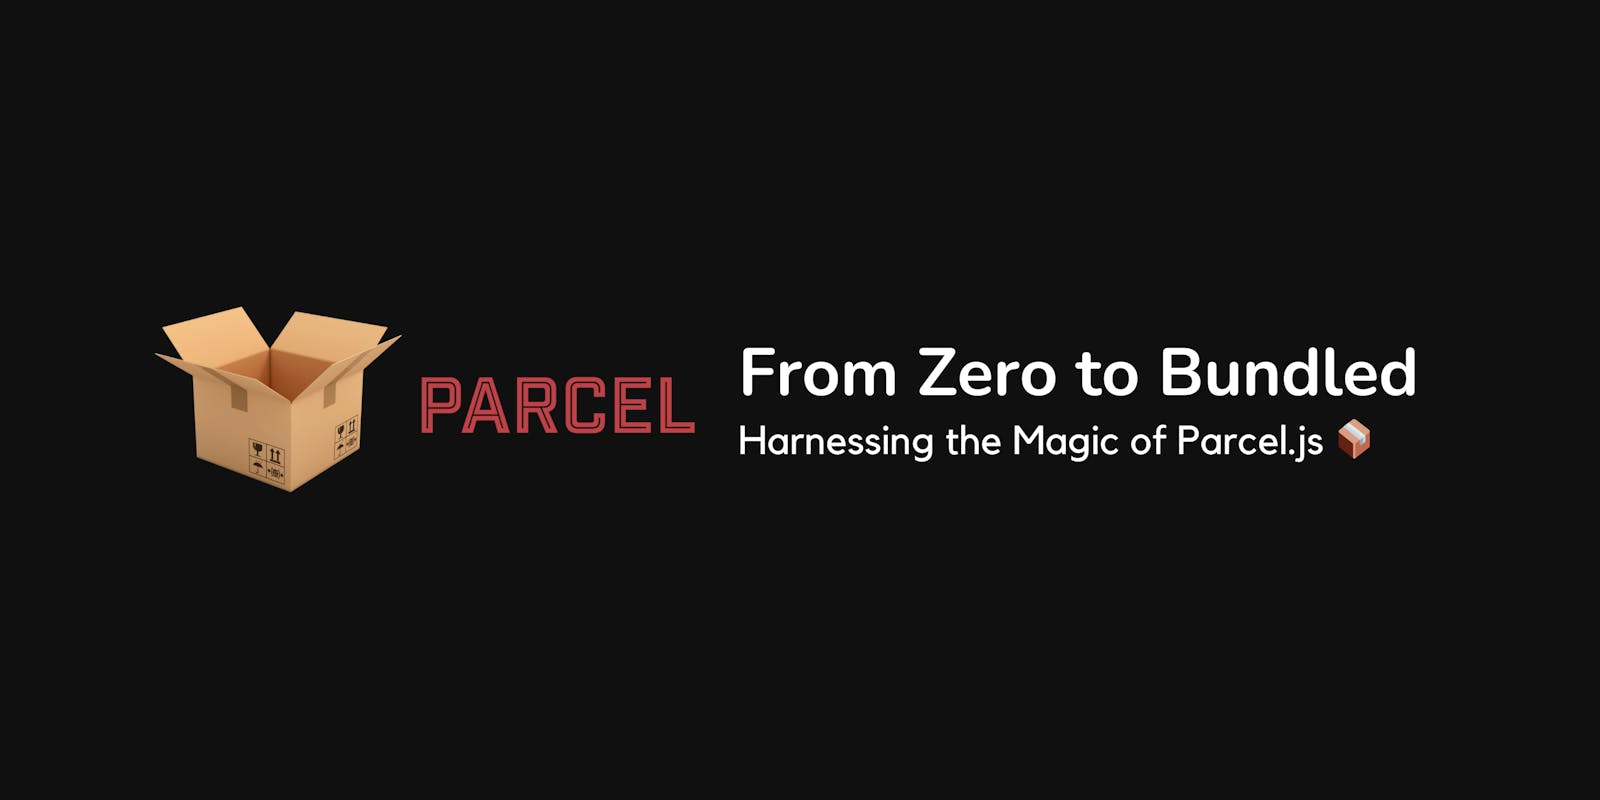 From Zero to Bundled: Harnessing the Magic of Parcel.js